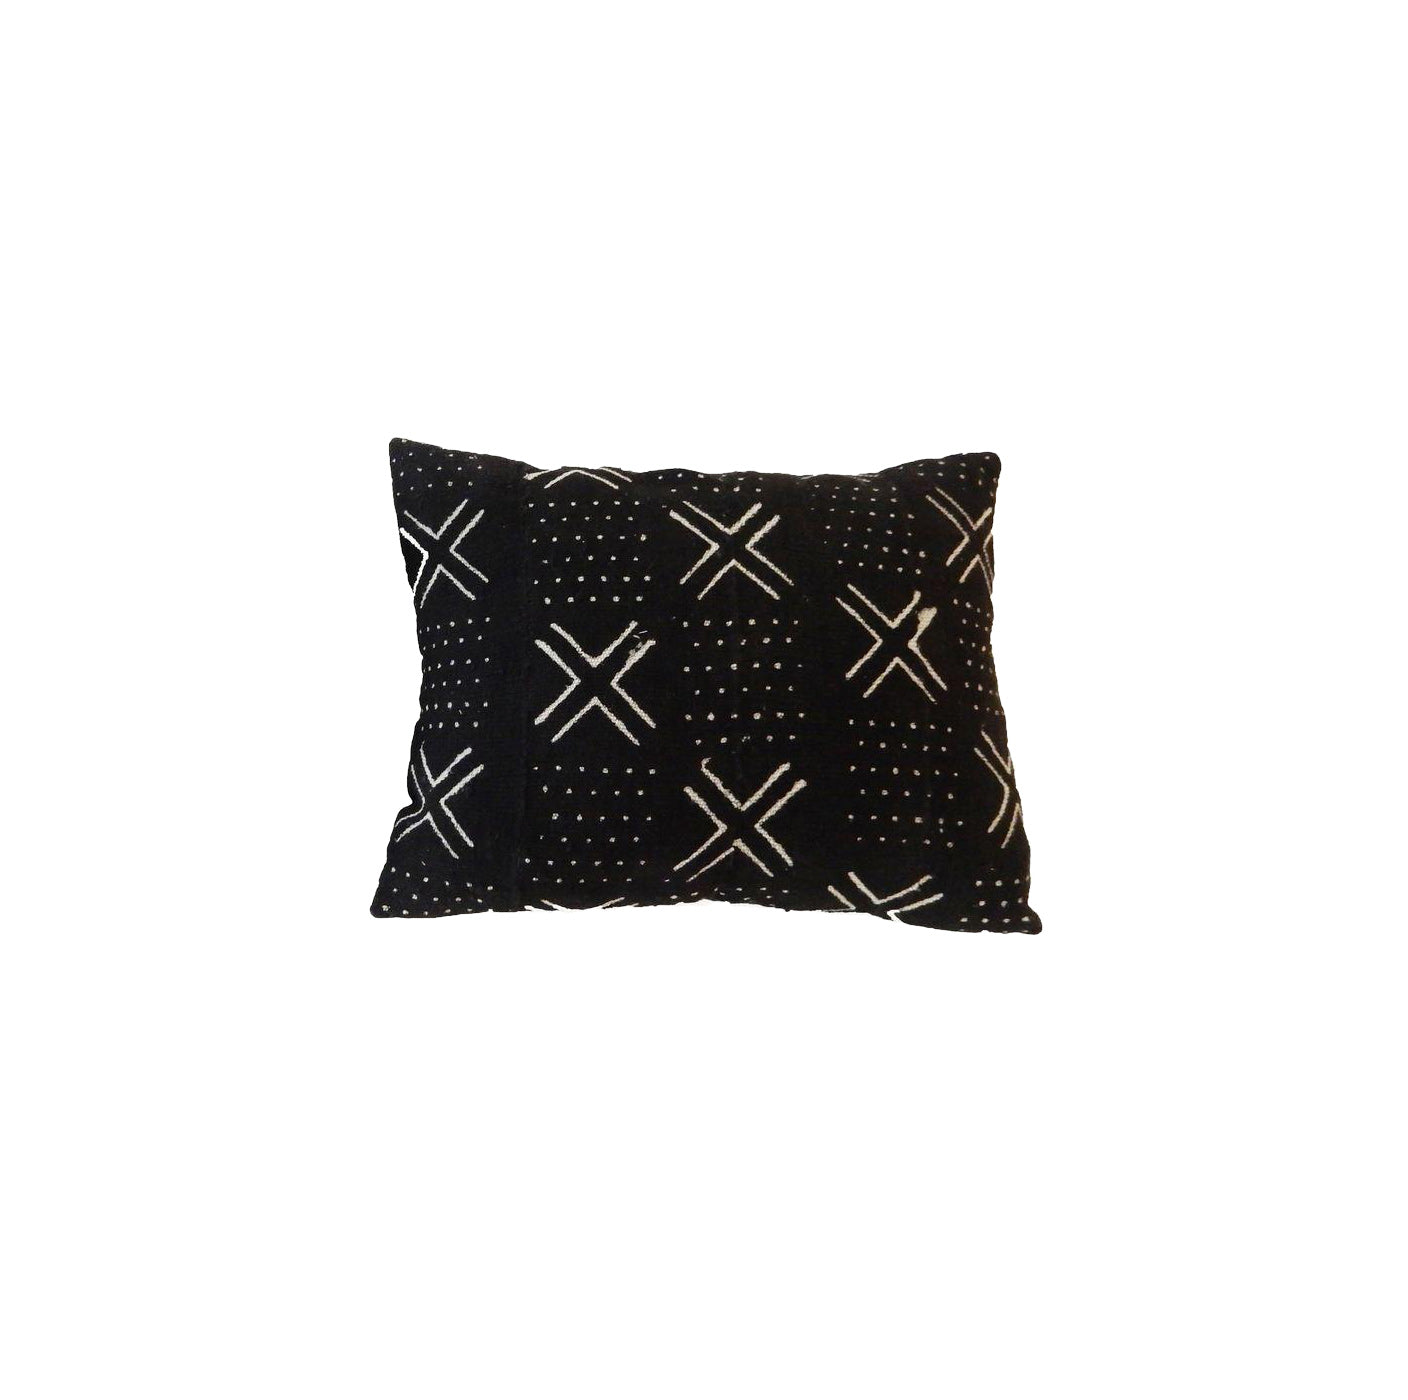 African Mud Cloth black & white pillows S/2 Mali 19" by 14" #2206